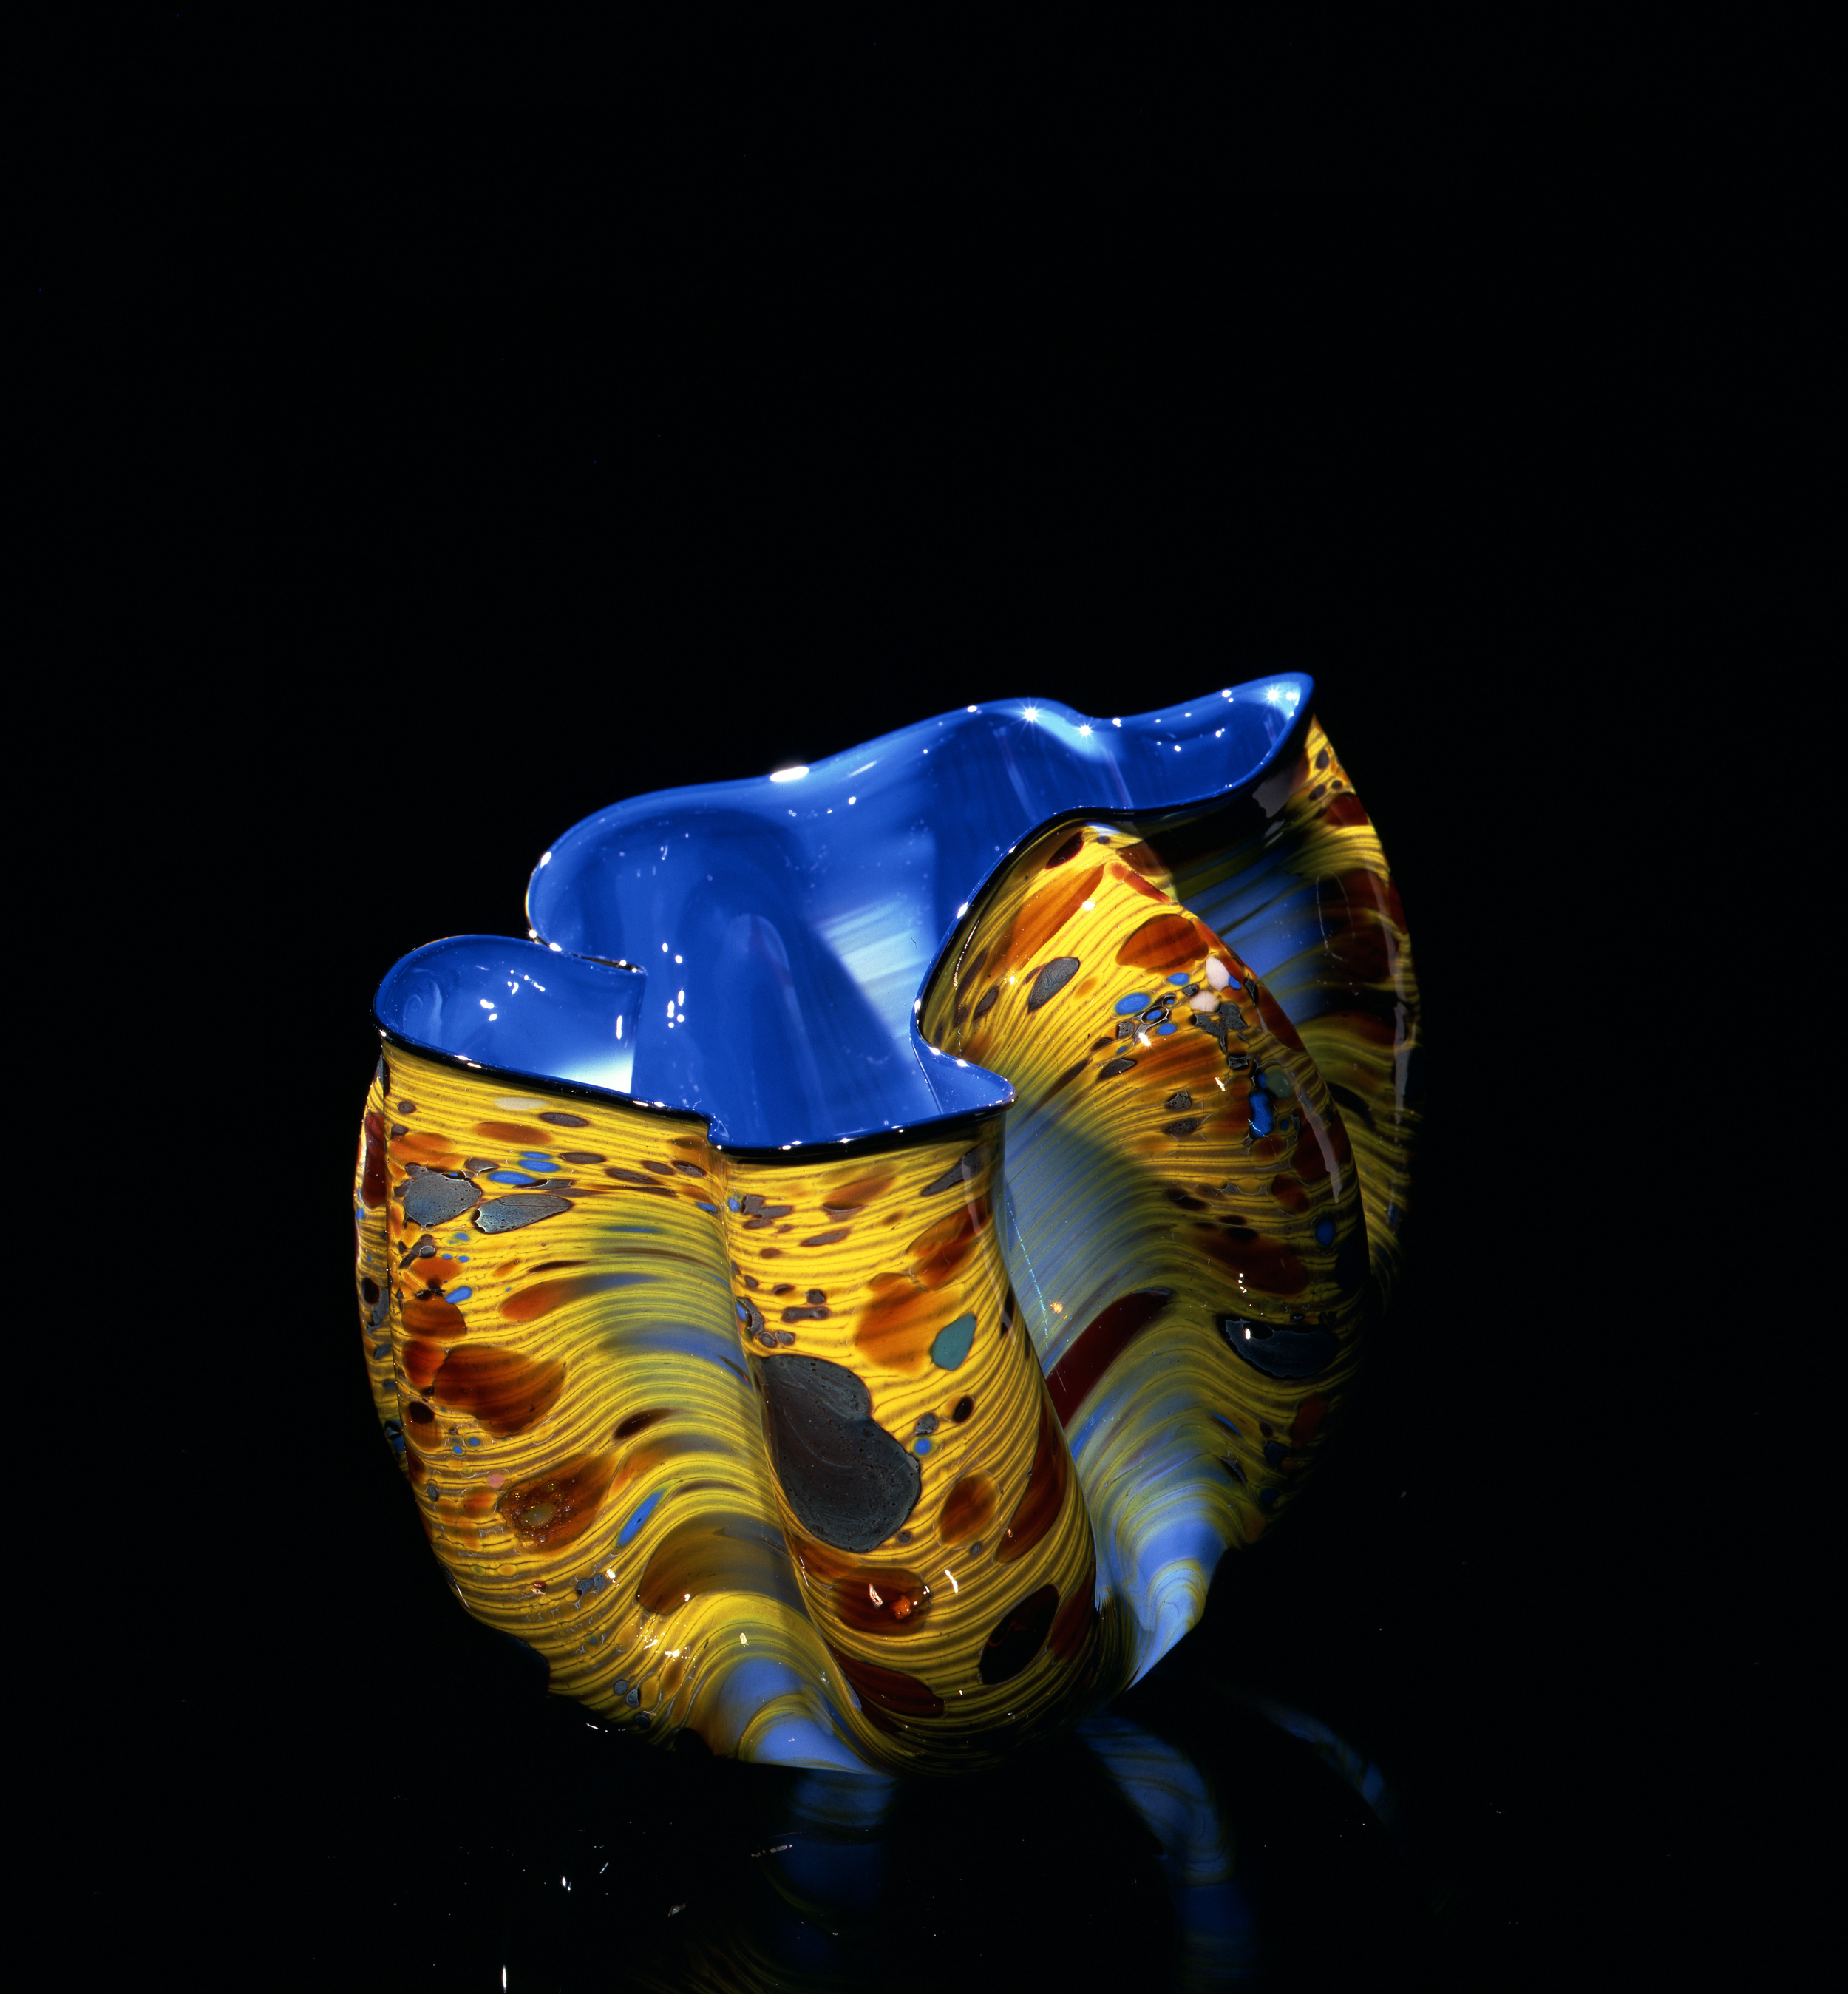  Dale Chihuly,&nbsp; Commelian Blue Macchia with Ochre Jimmies&nbsp; (1982, glass, 6 x 10 x 9&nbsp;inches), DC.118 